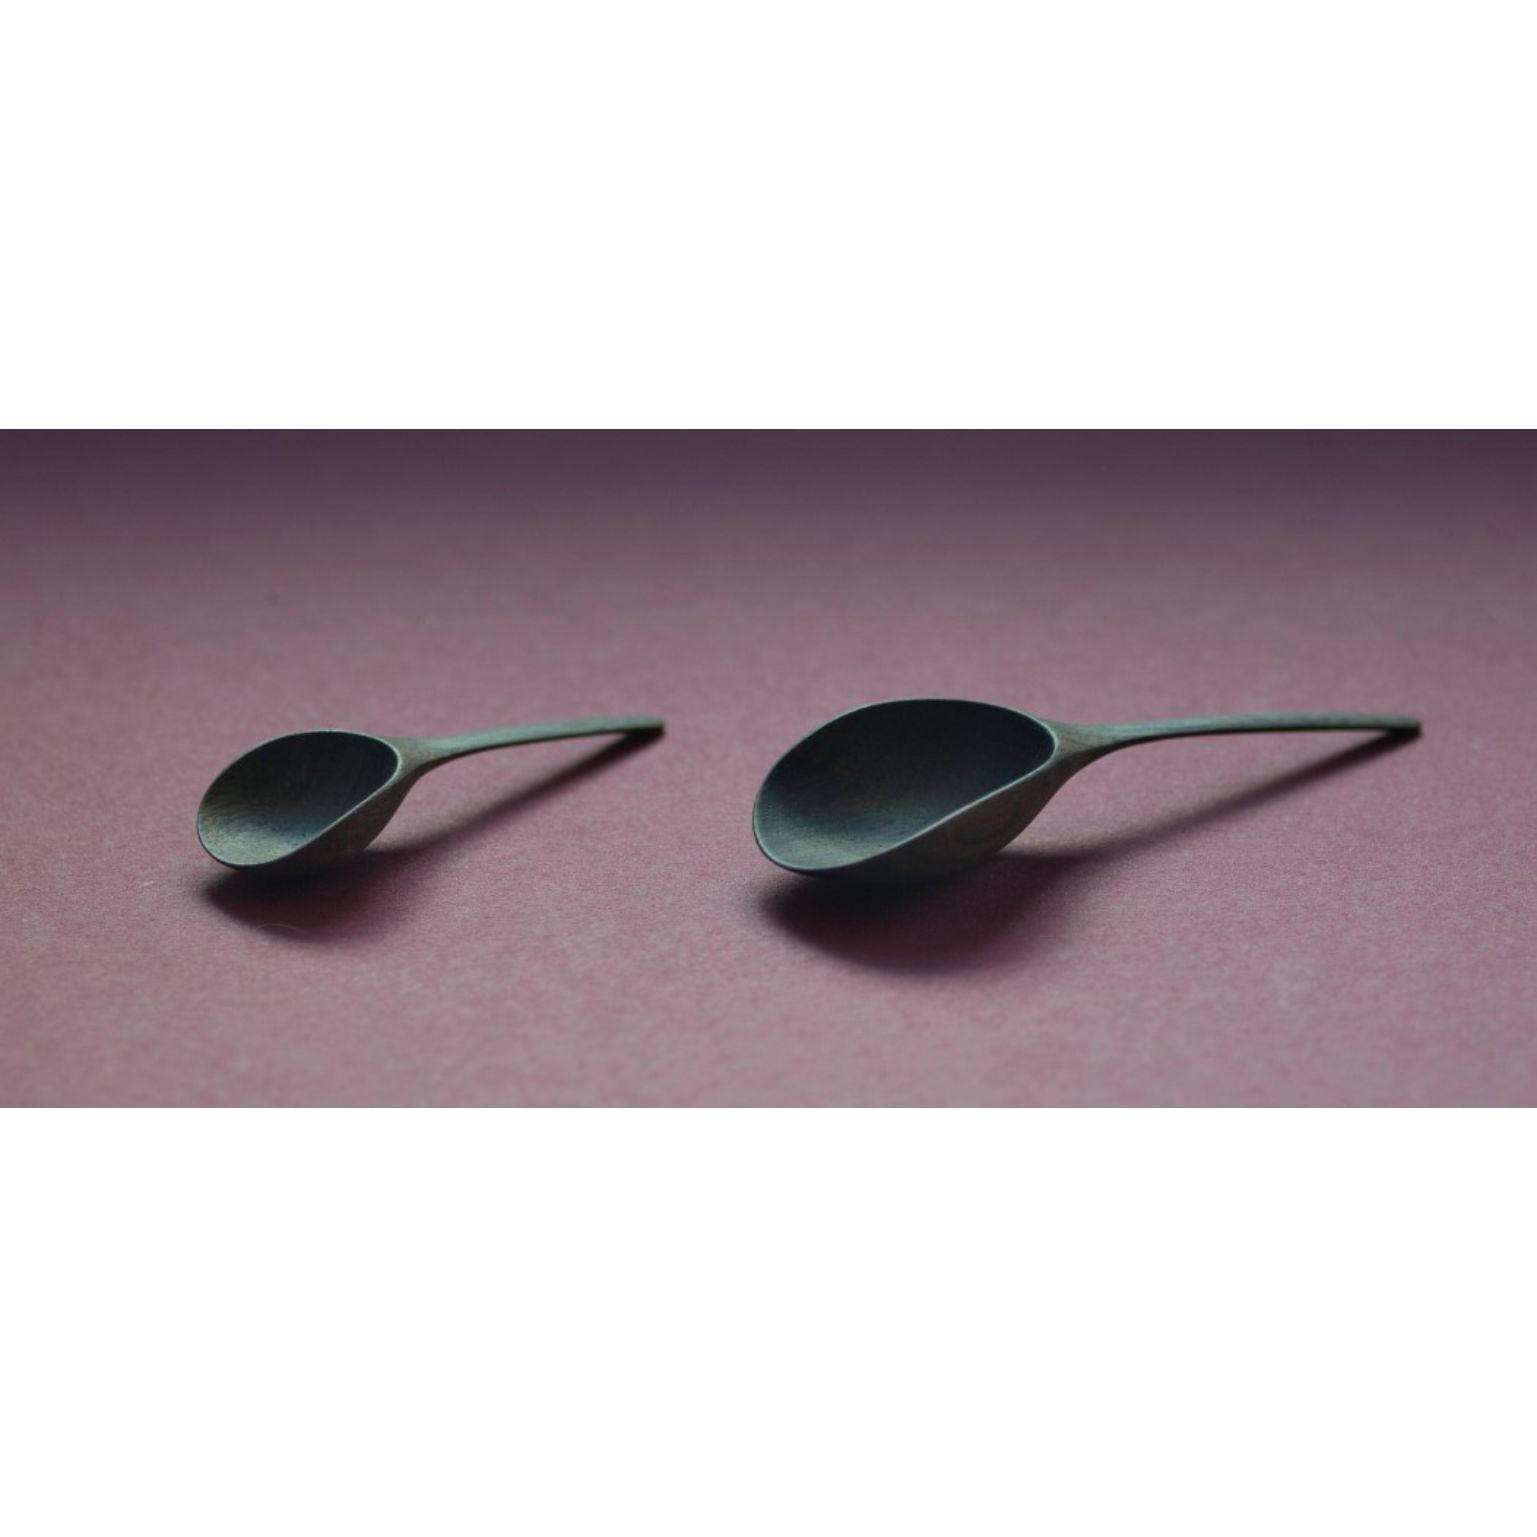 Hand-Carved Set of 2 Kupu Spoons by Antrei Hartikainen